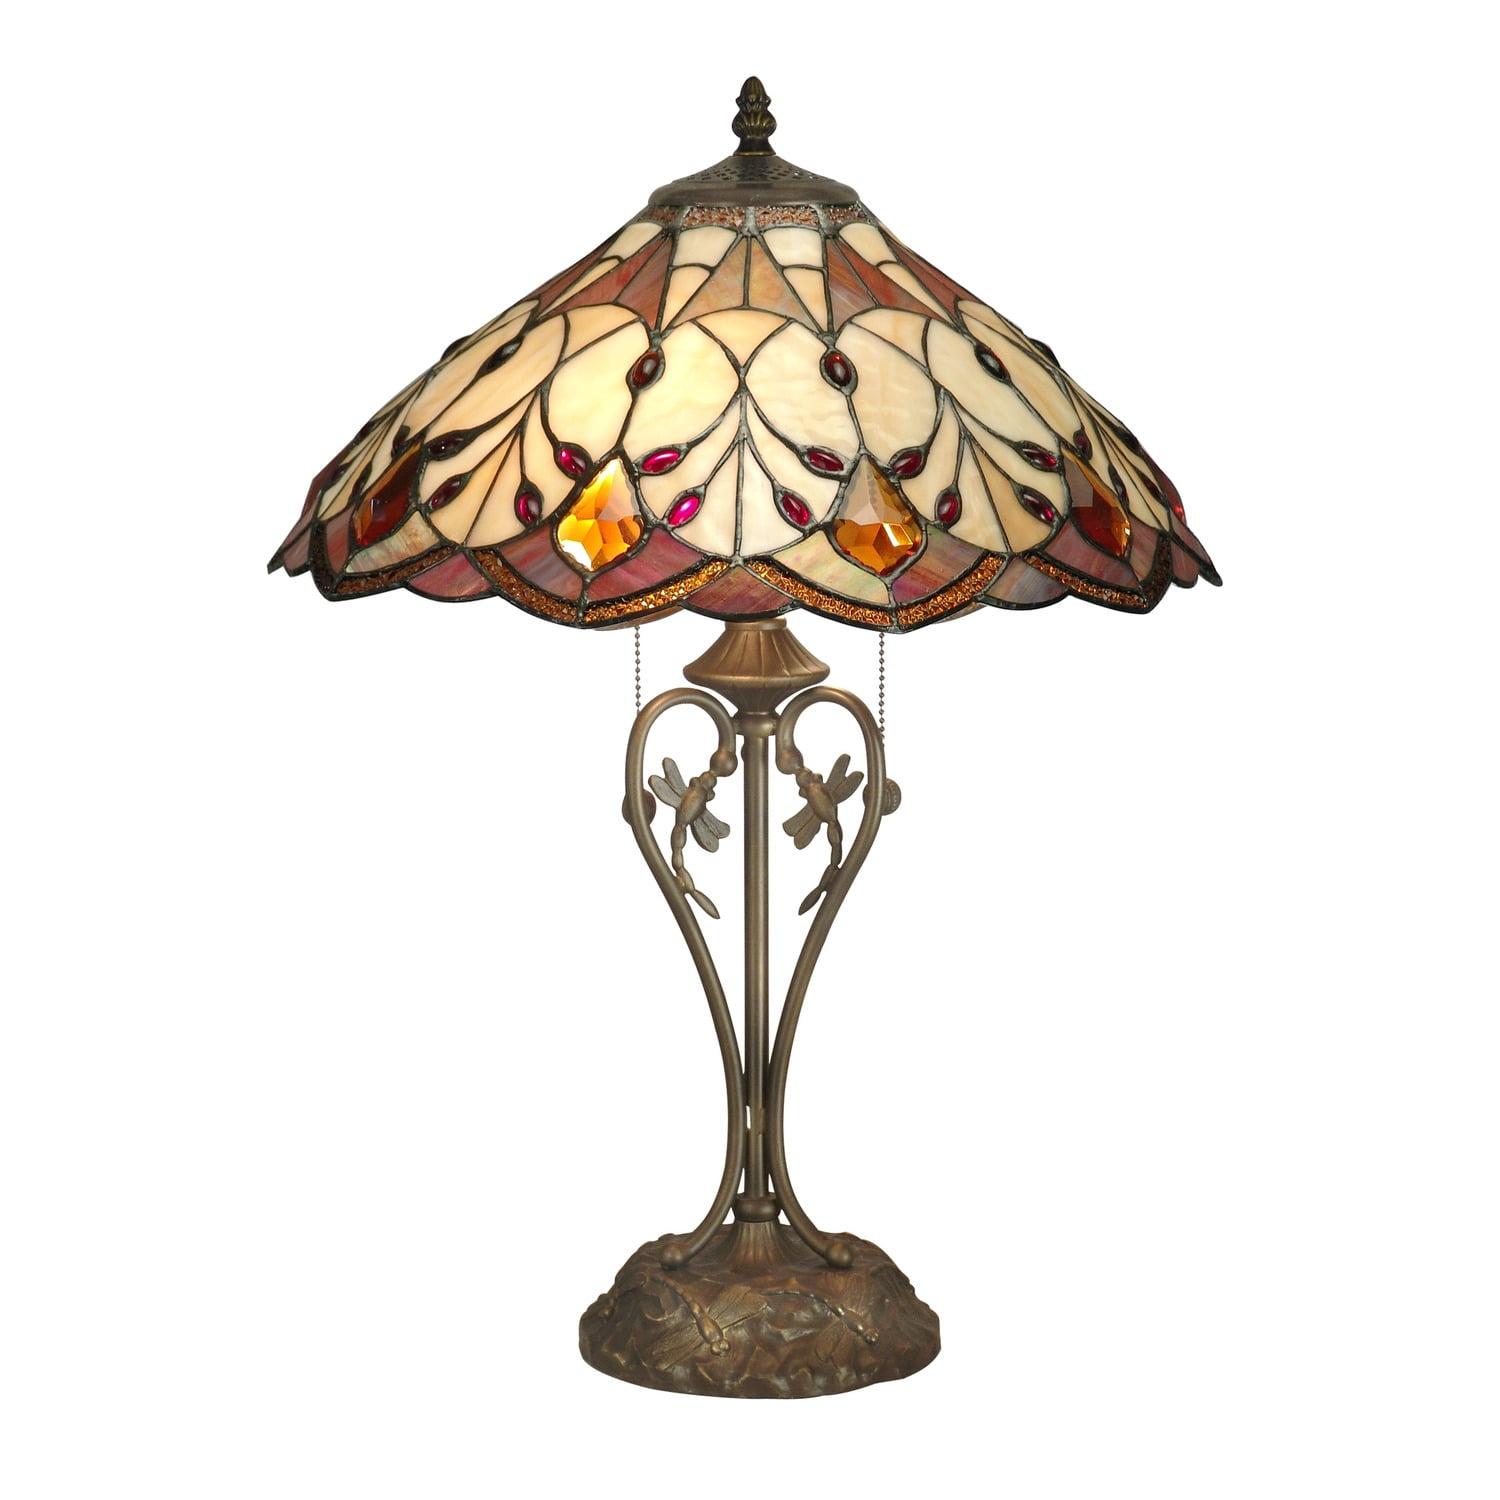 Marshall Antique Bronze Edison Table Lamp with Stained Glass Shade